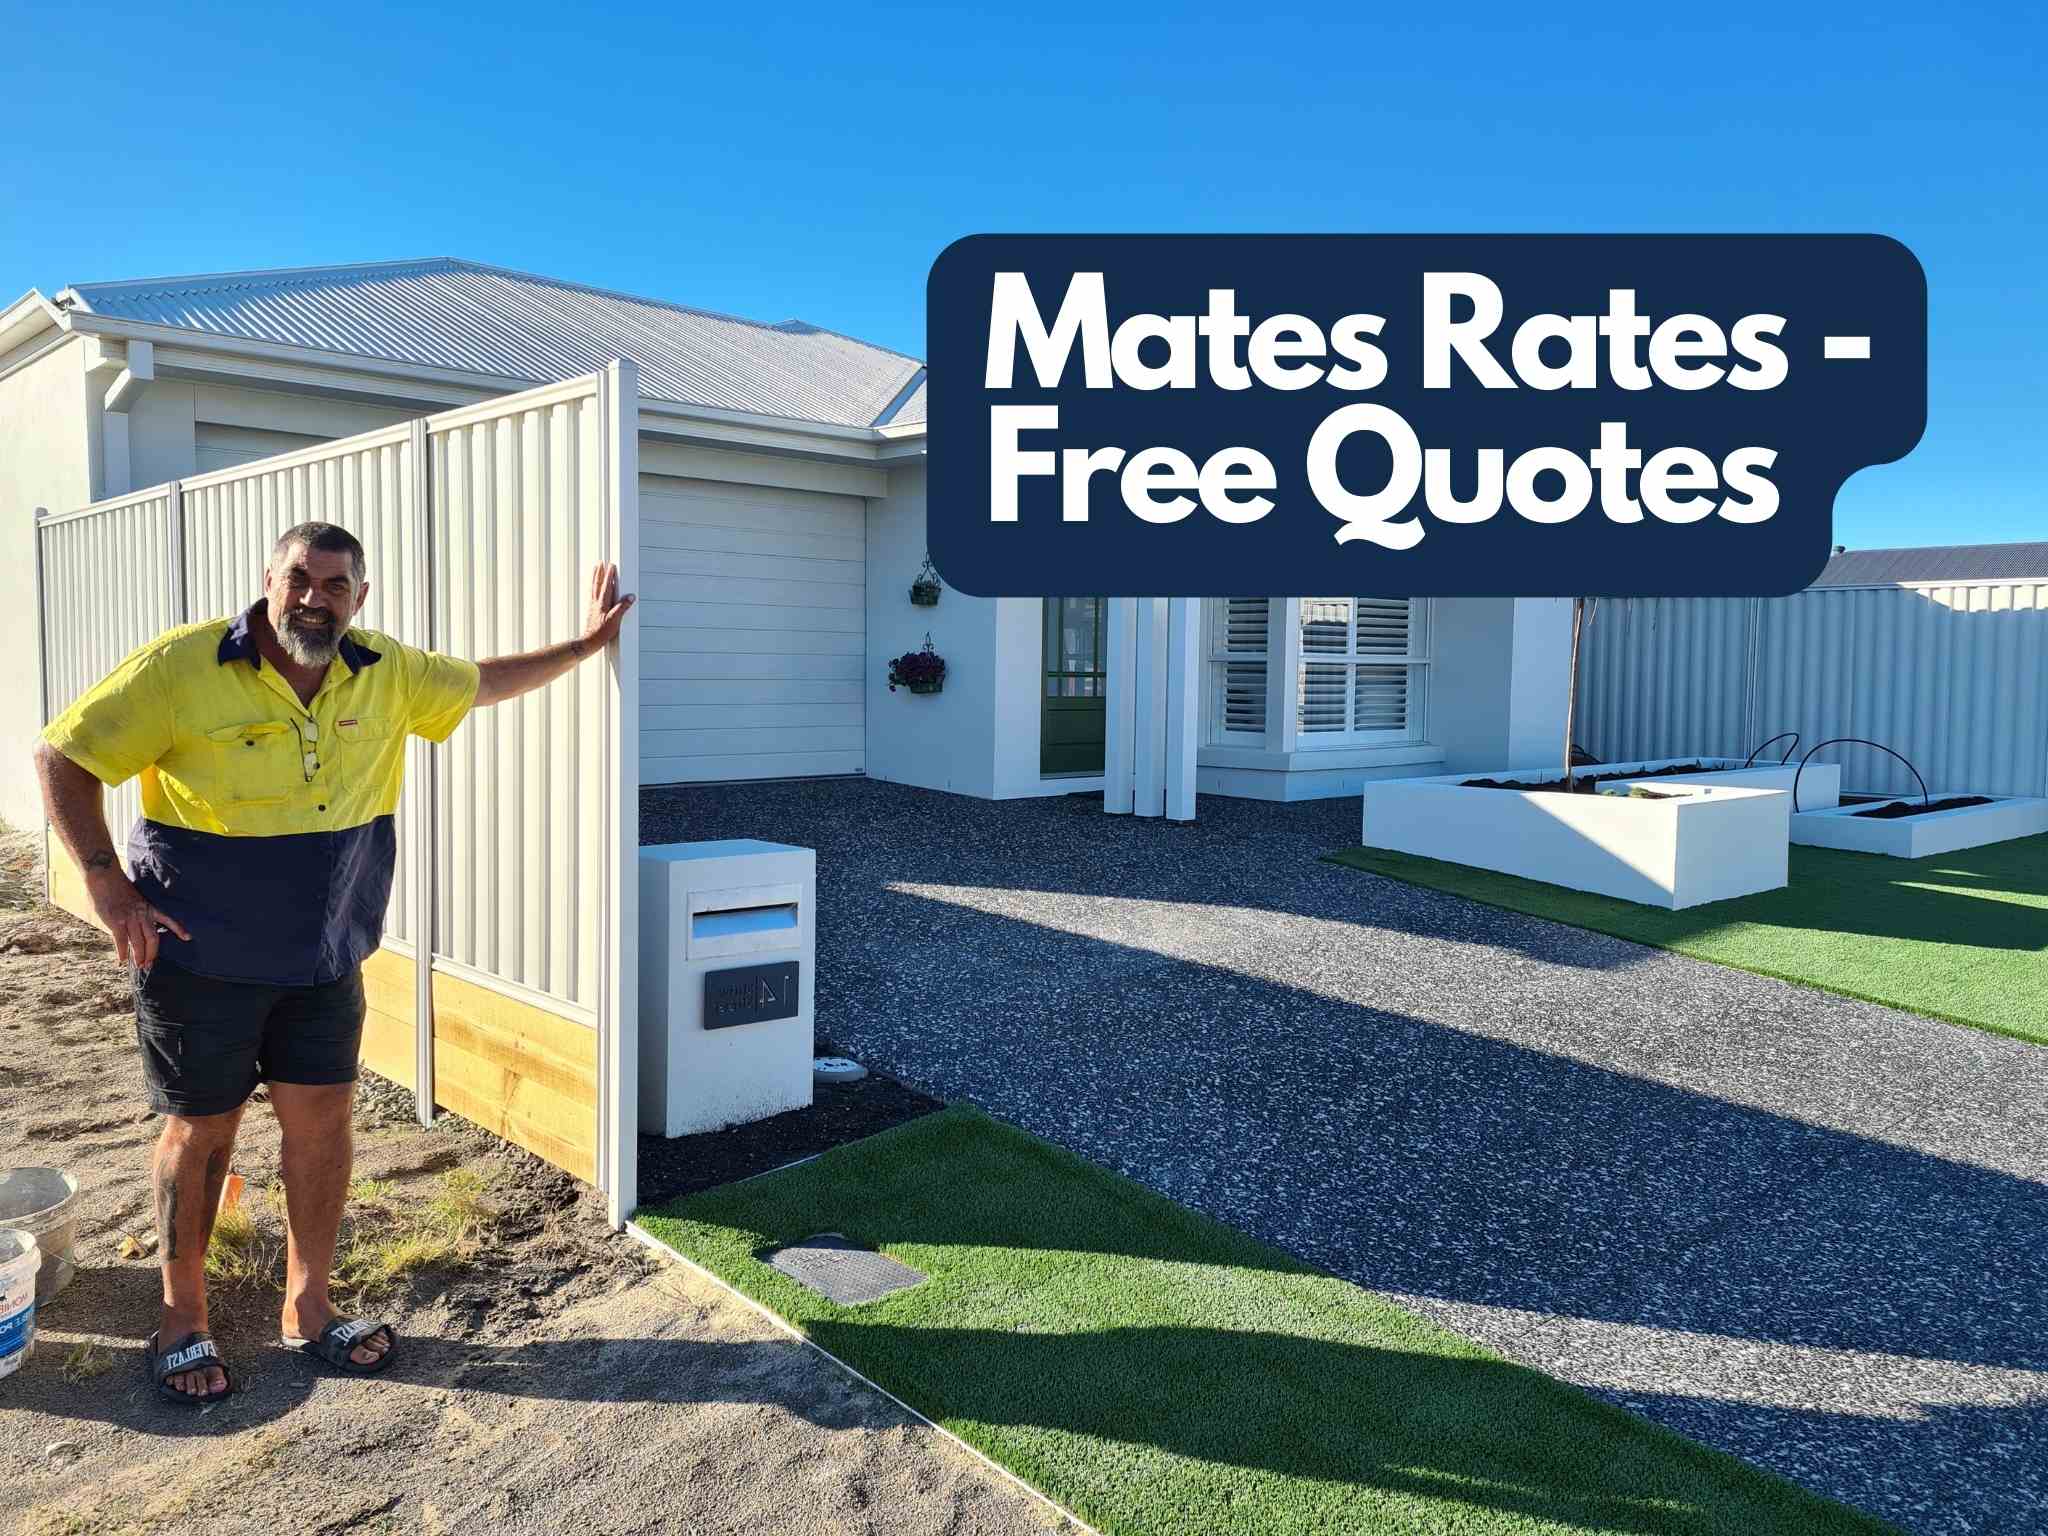 Mates Rates - Free Quotes(1) For Your Fencing In Brisbane